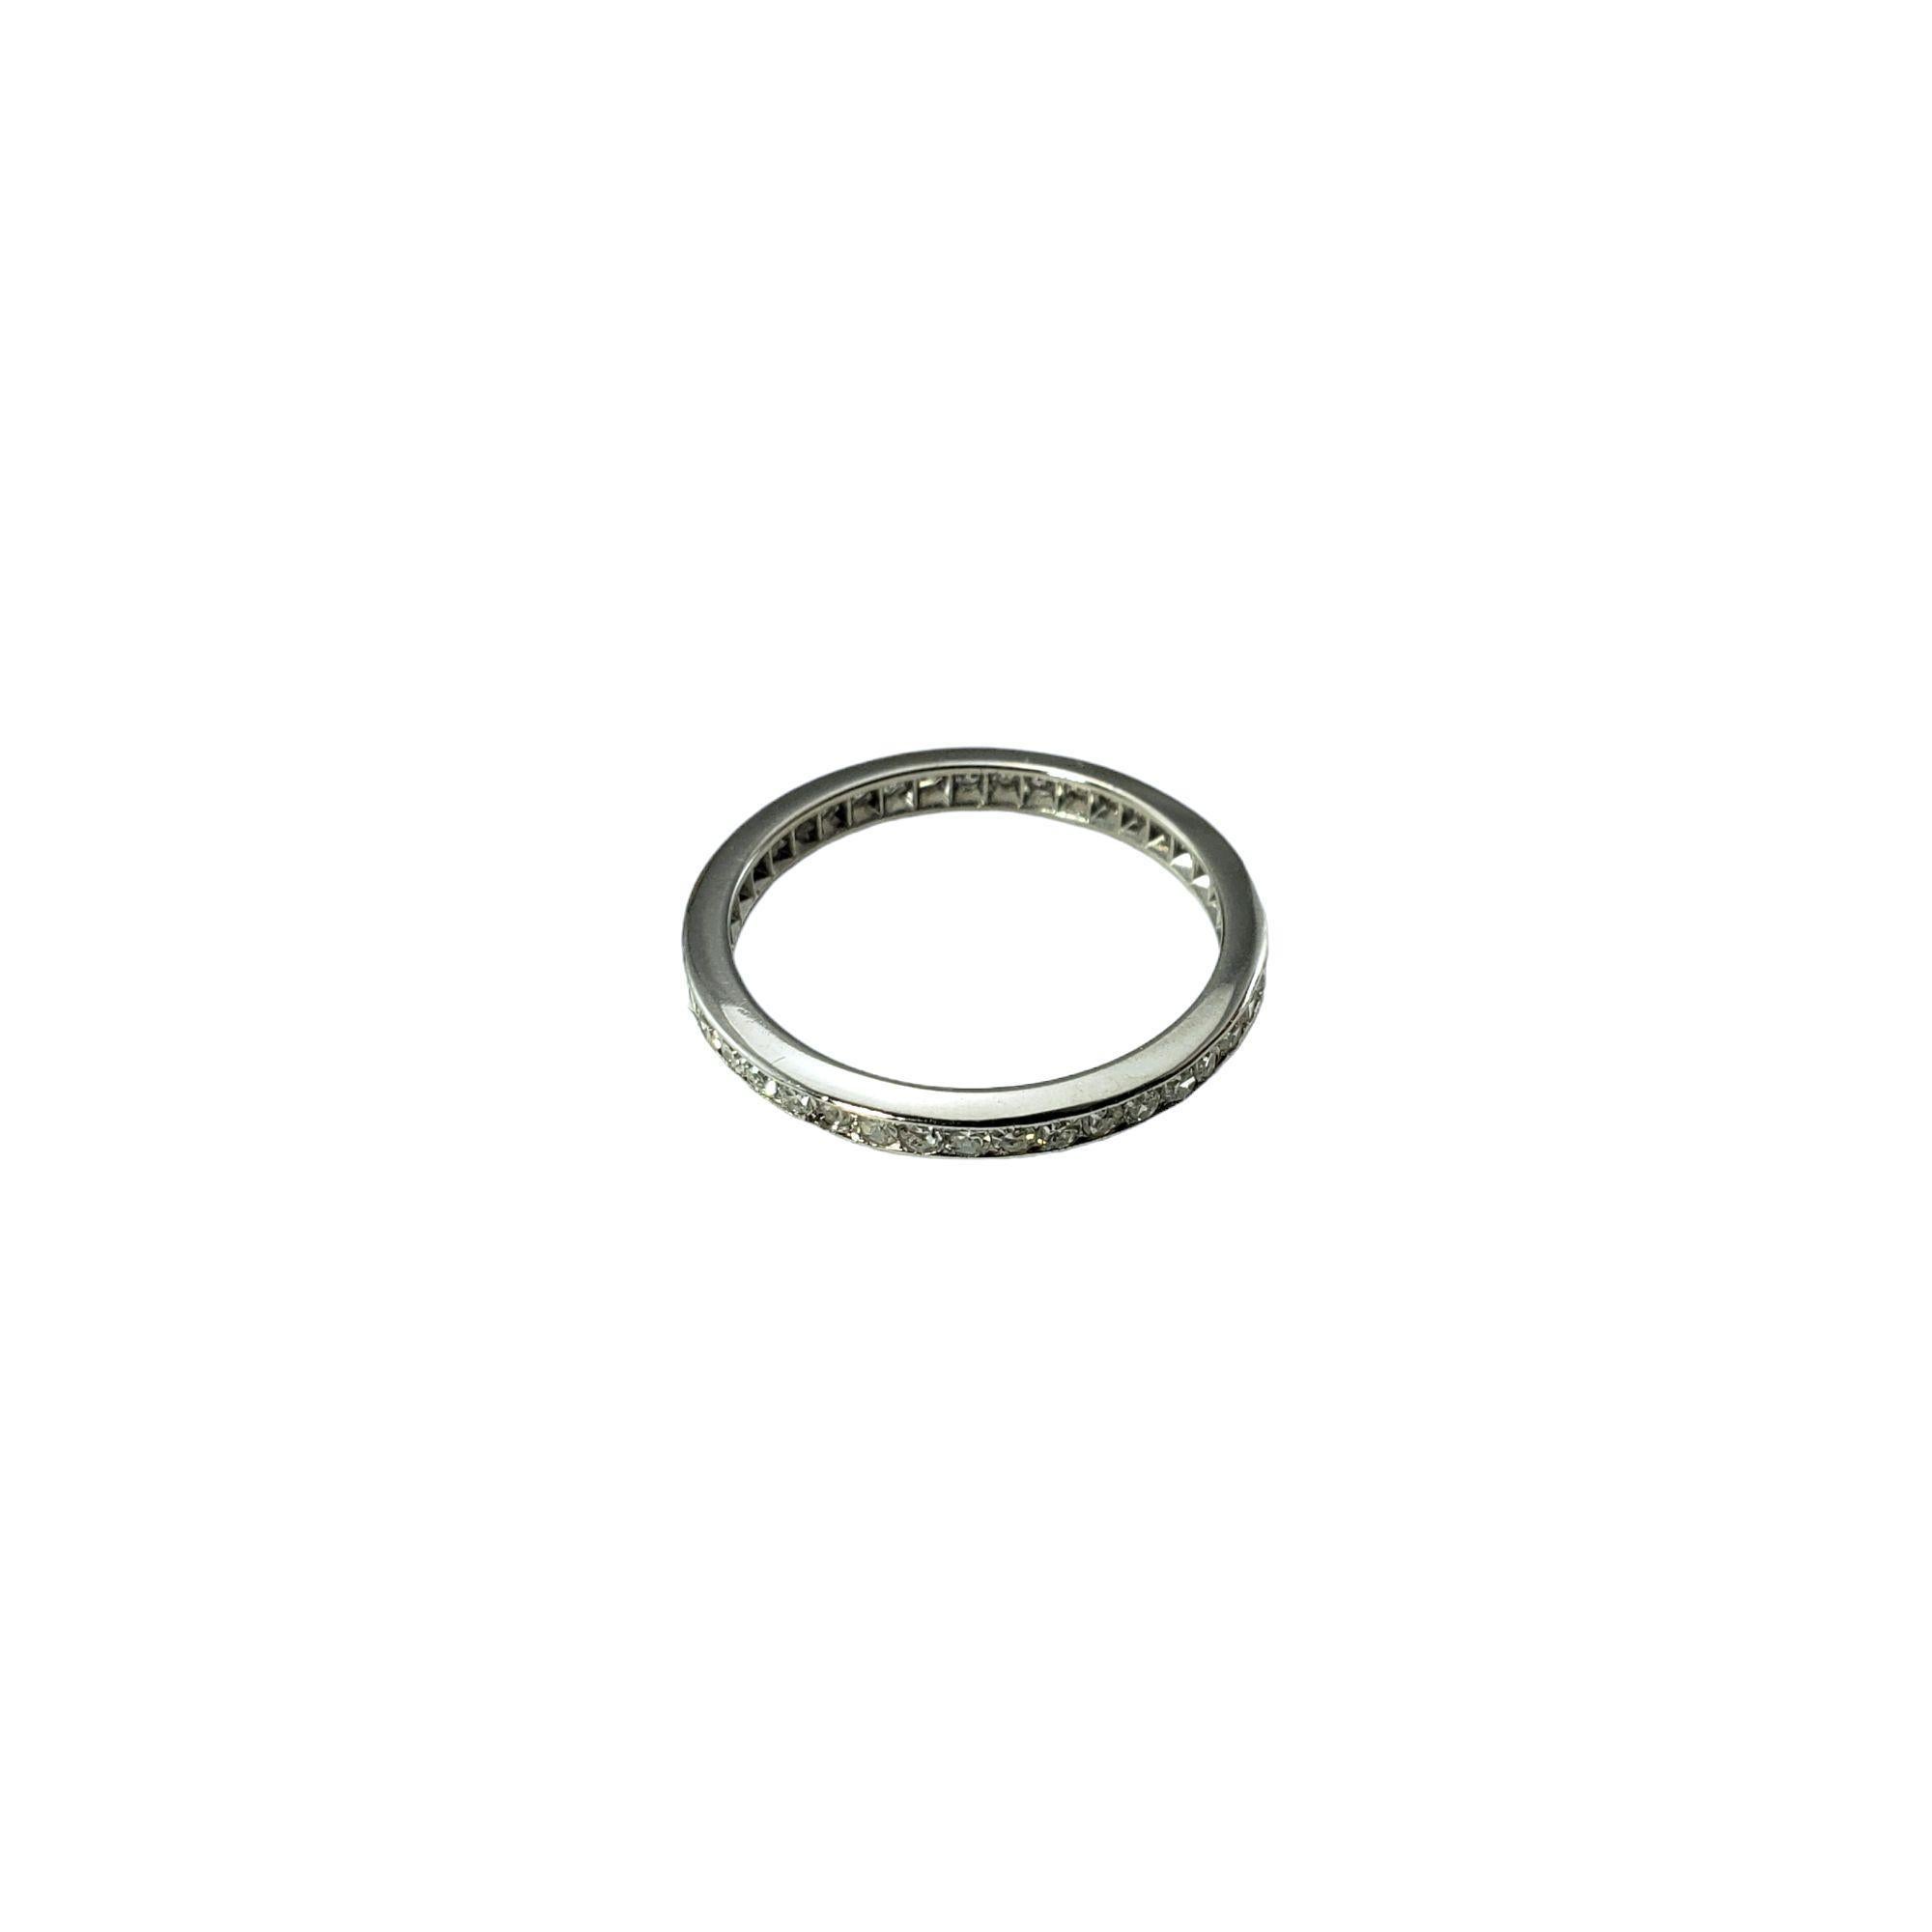 6.75 ring size